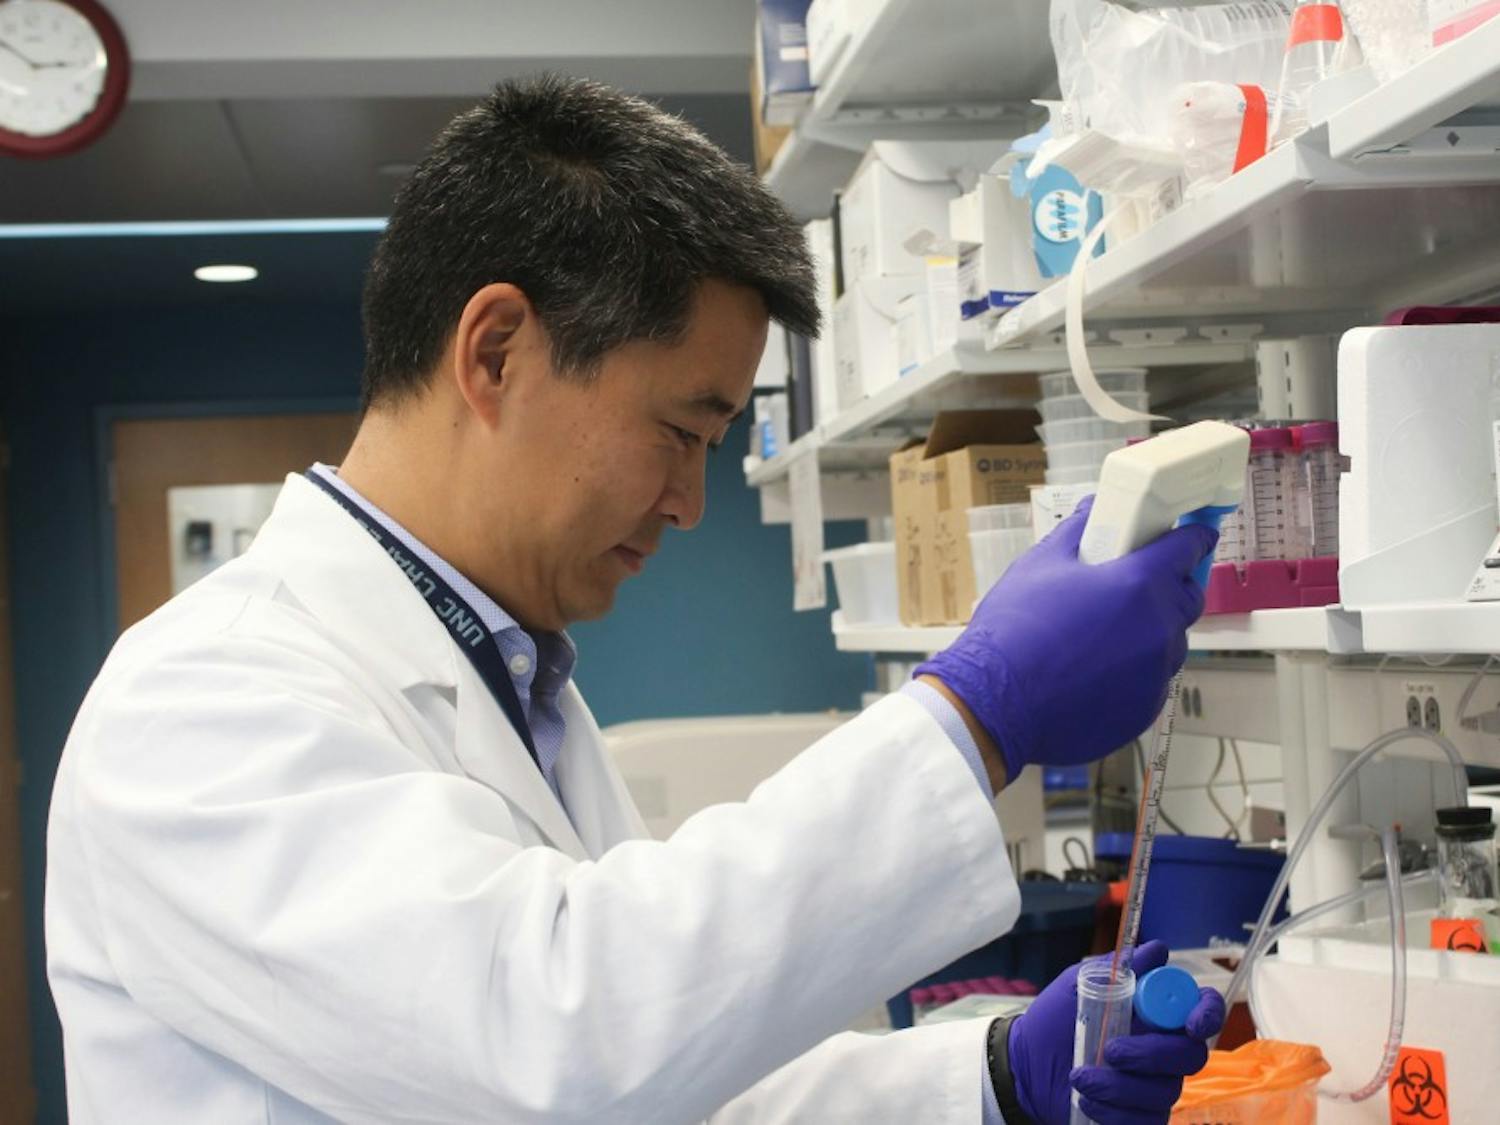 Chapel Hill resident, Dr. Edwin Kim, 55, working in the lab for the UNC Food Allergy Initiative at the Mary Ellen Jones building on Friday, Oct. 4, 2019. Kim and the UNC Food Allergy Initiative are developing peanut allergy treatments to make those with allergies less reactive to allergens. Kim's daughter and son both have nut allergies.